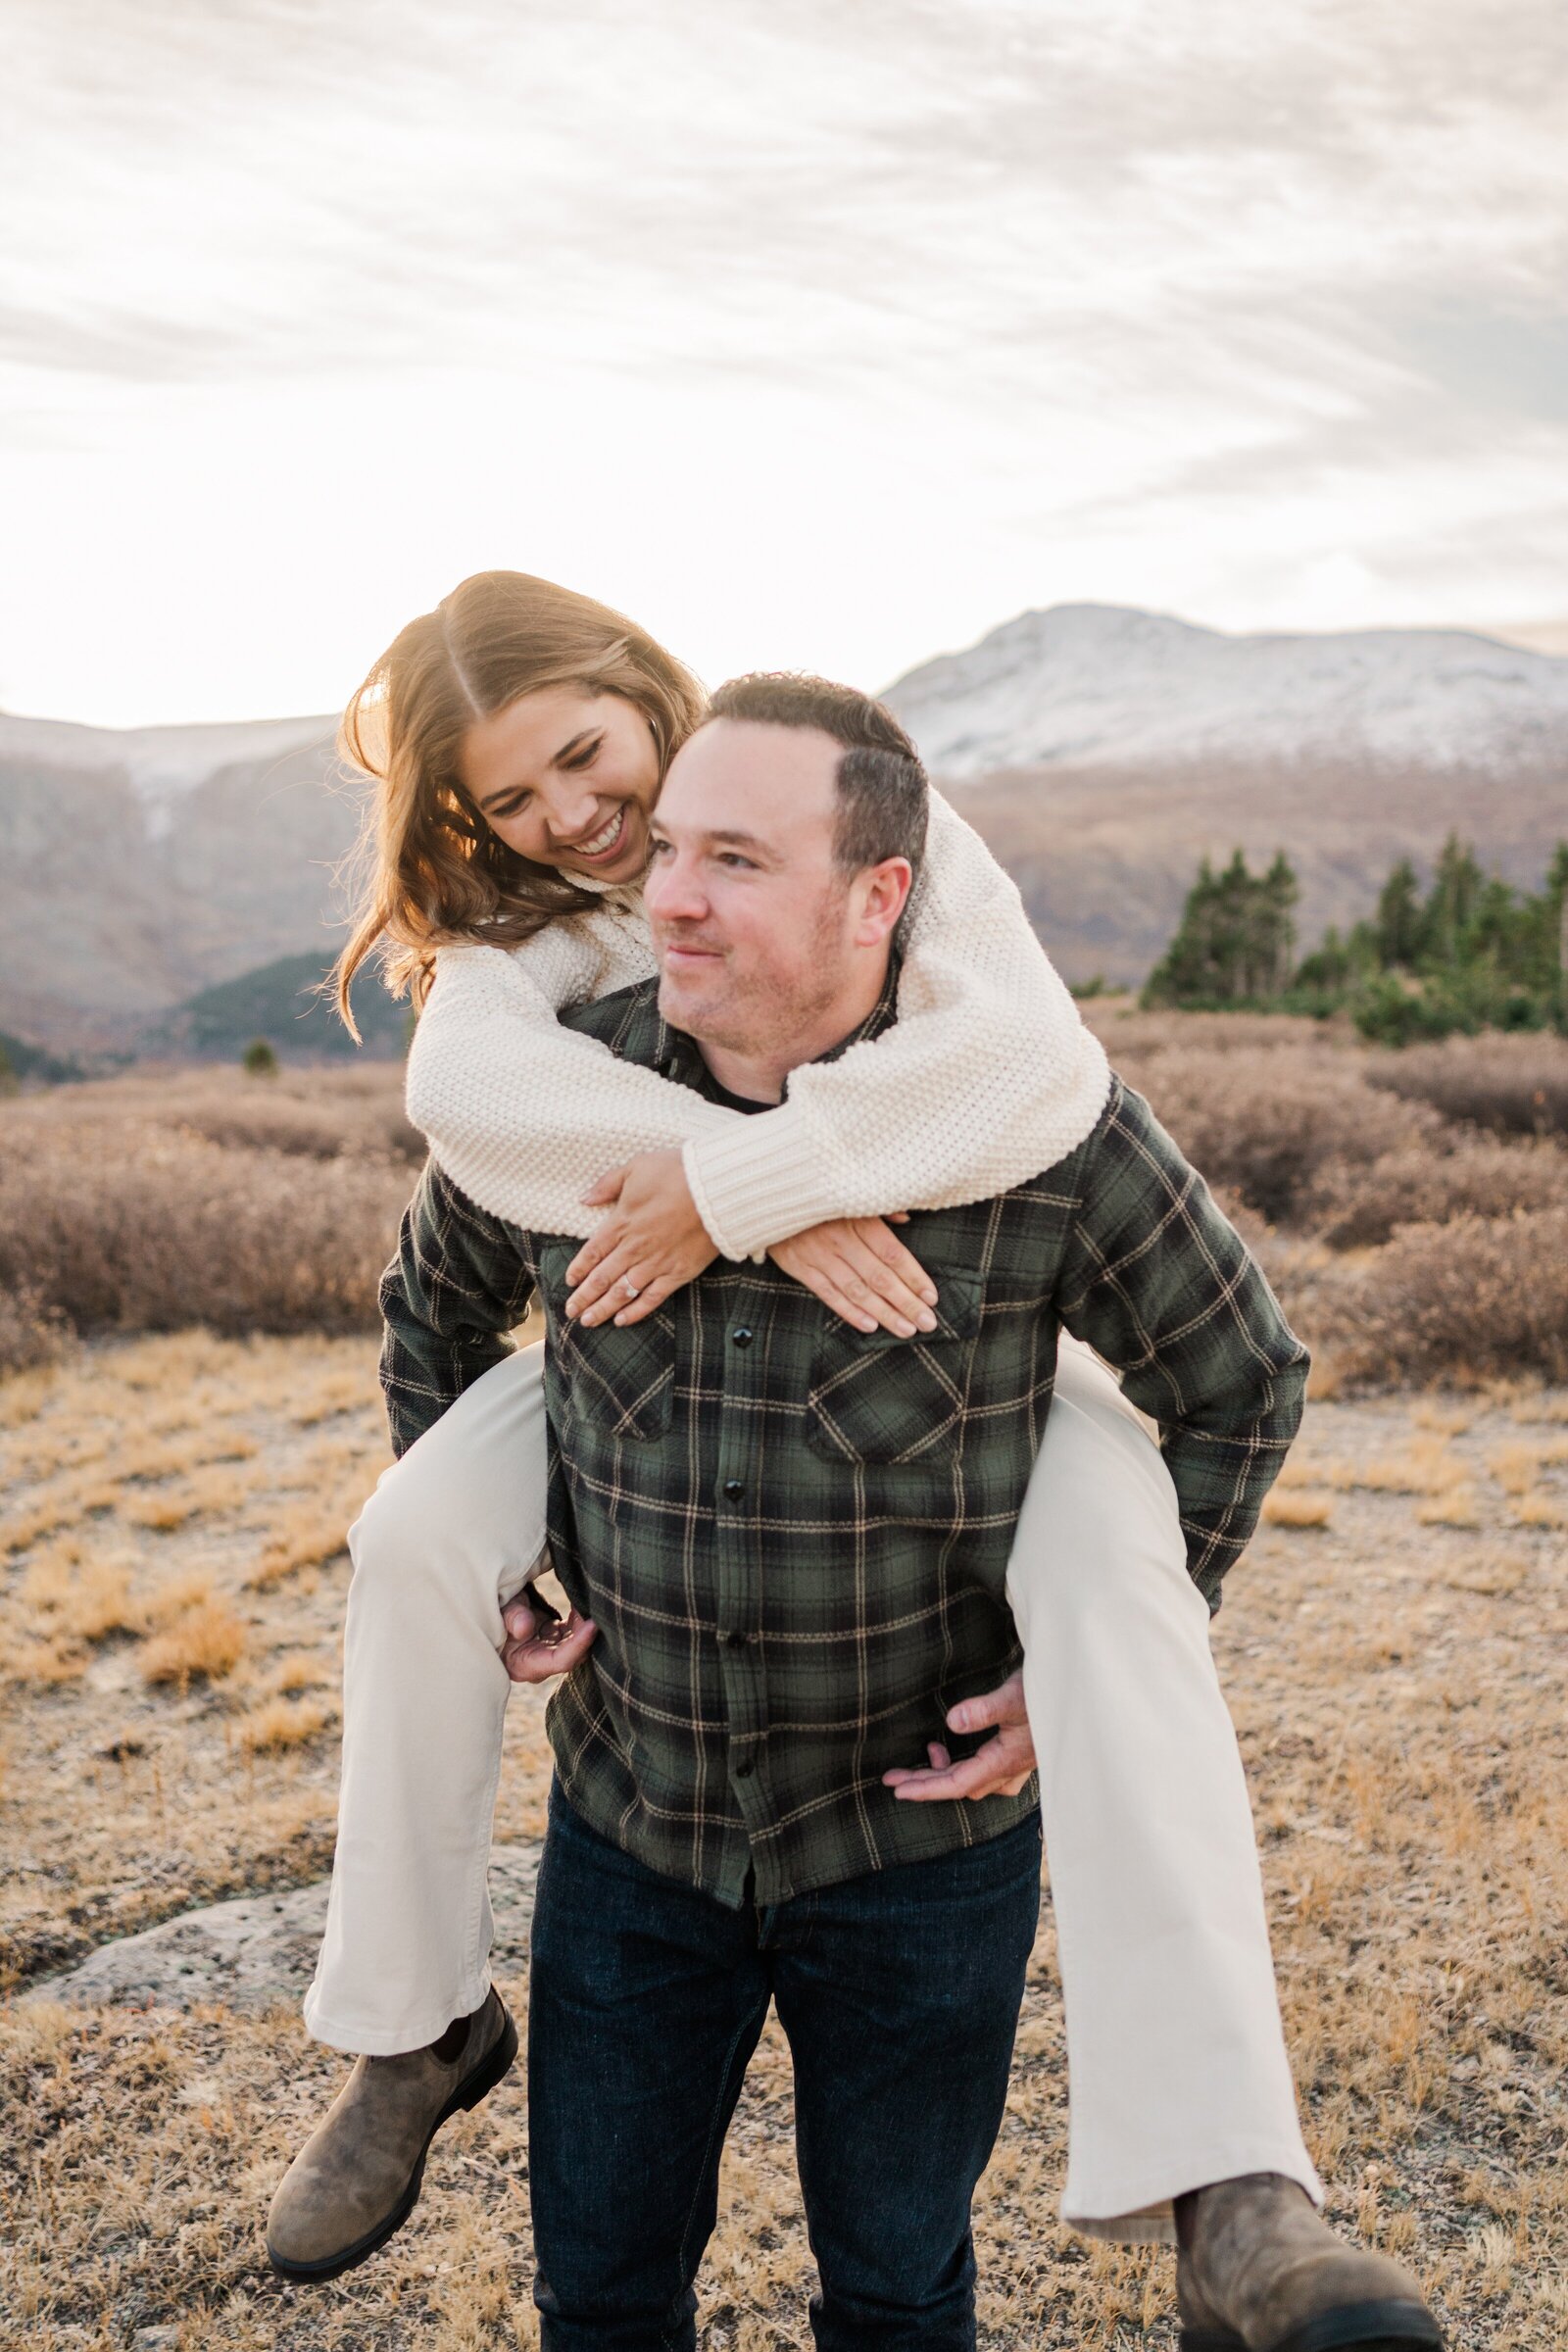 Create unforgettable memories with a "just because" photoshoot in the beautiful Colorado landscape. Samantha Immer captures the joy, love, and beauty of your relationship.